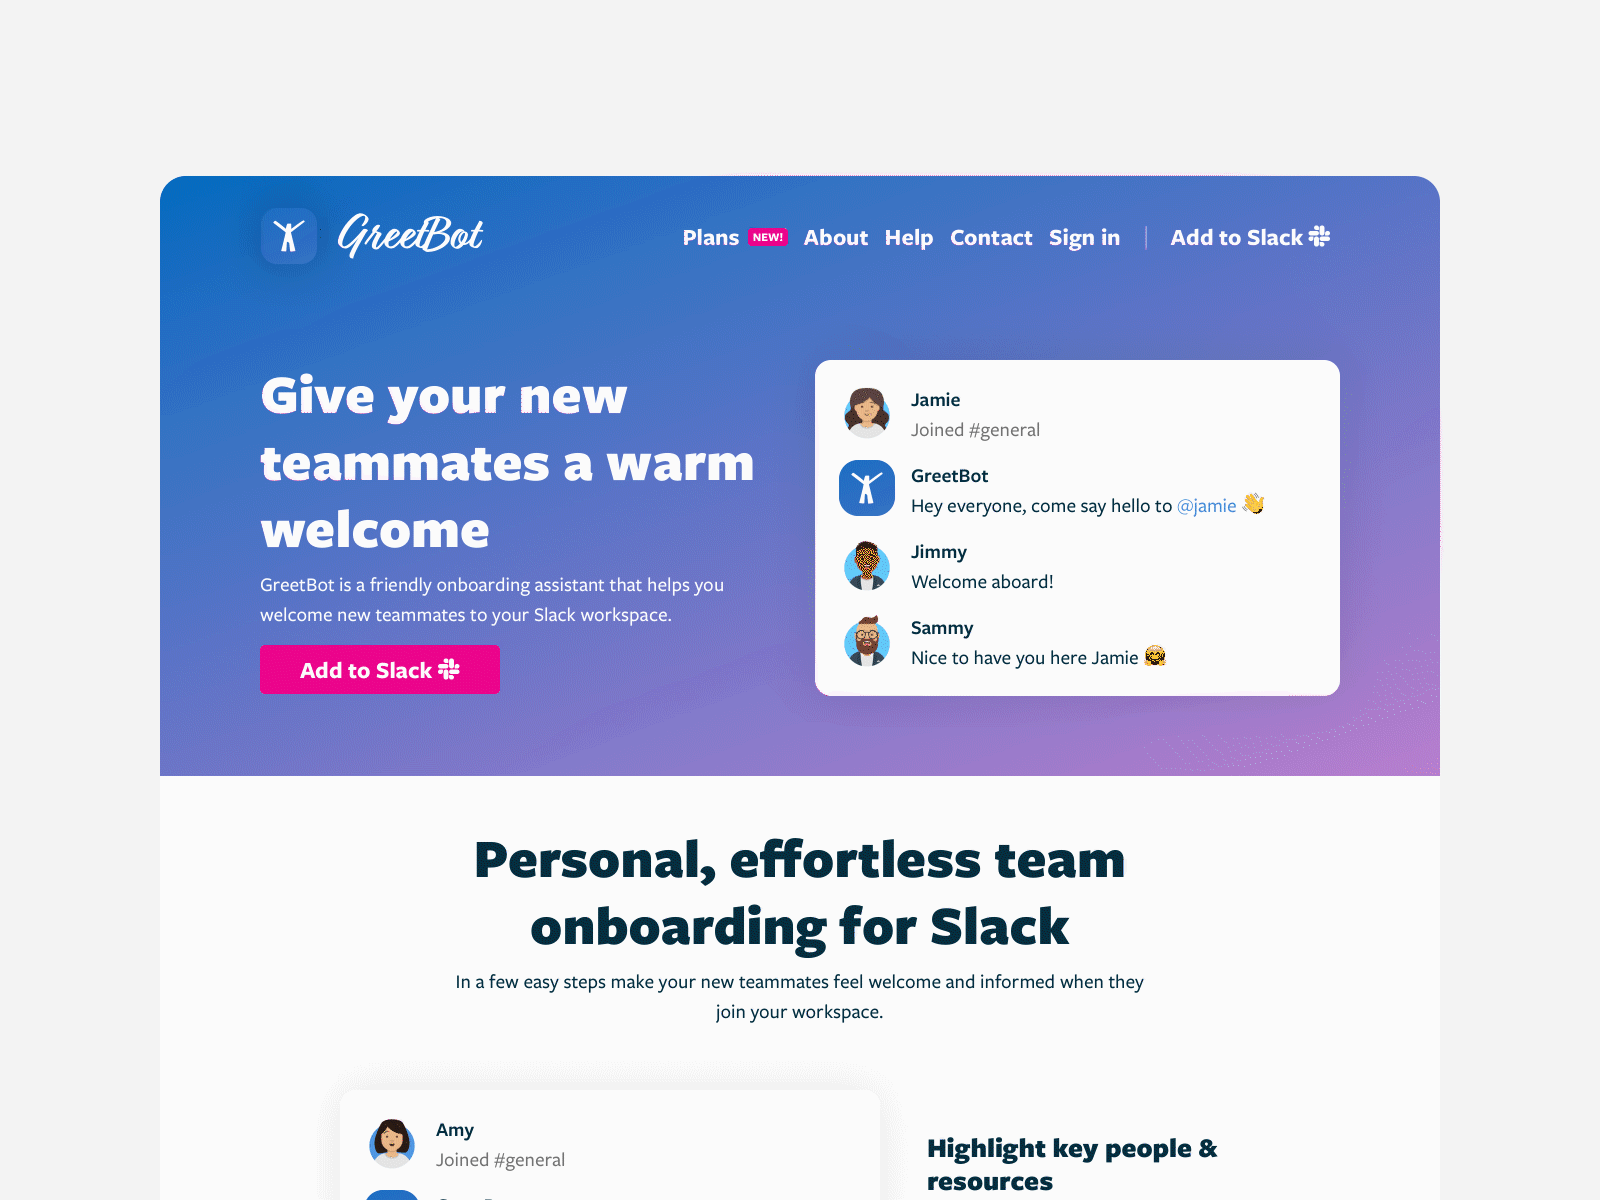 Animated GIF showing a landing page in light and dark color schemes